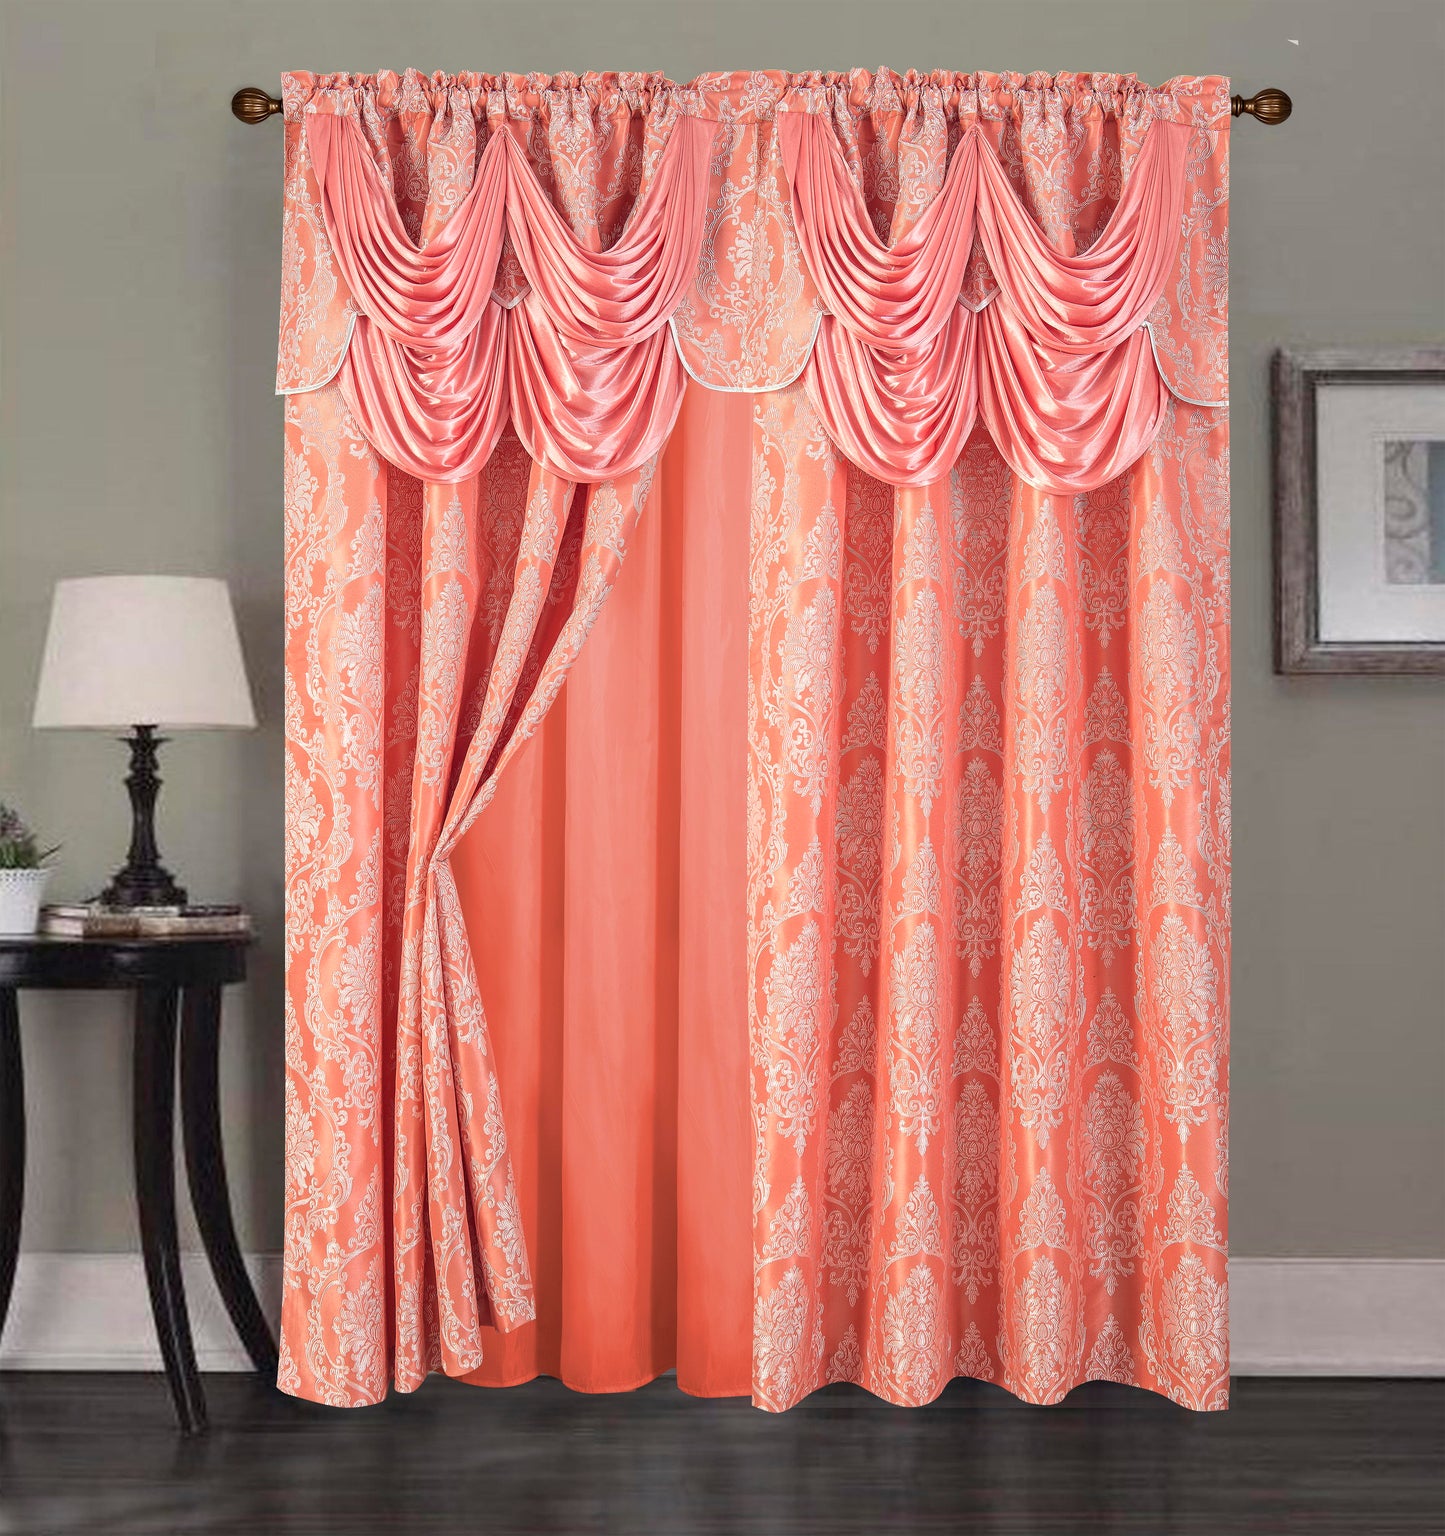 2PC CURTAIN SET W/ ATTACHED VALANCE & BACKING - Cora